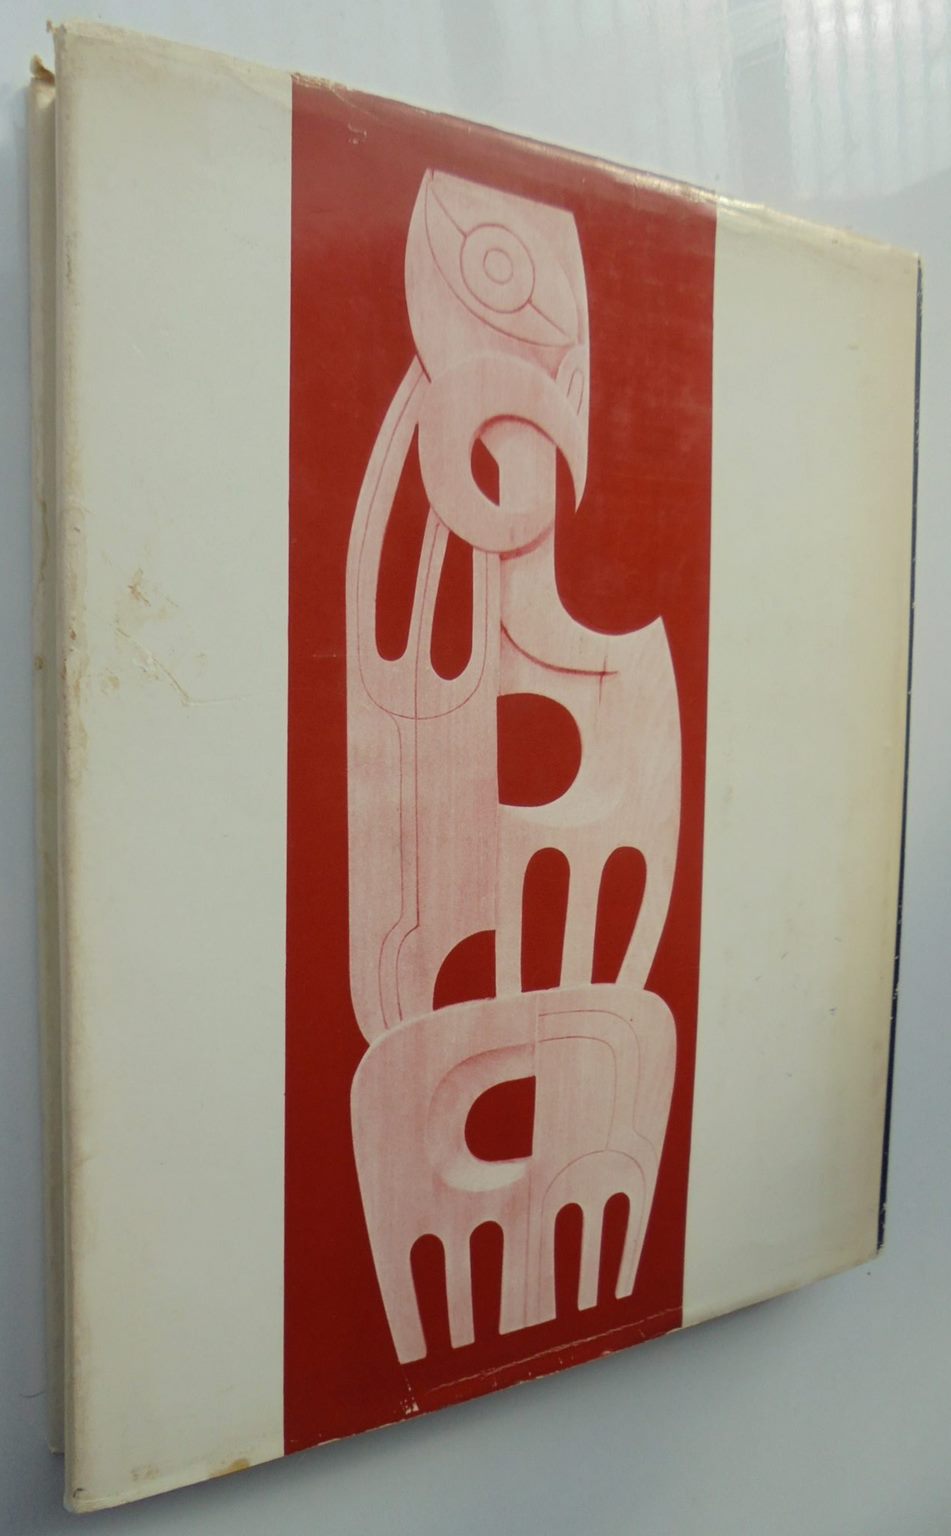 MAORI. Text by James Ritchie, photos by Ans Westra. FIRST EDITION, VERY SCARCE.